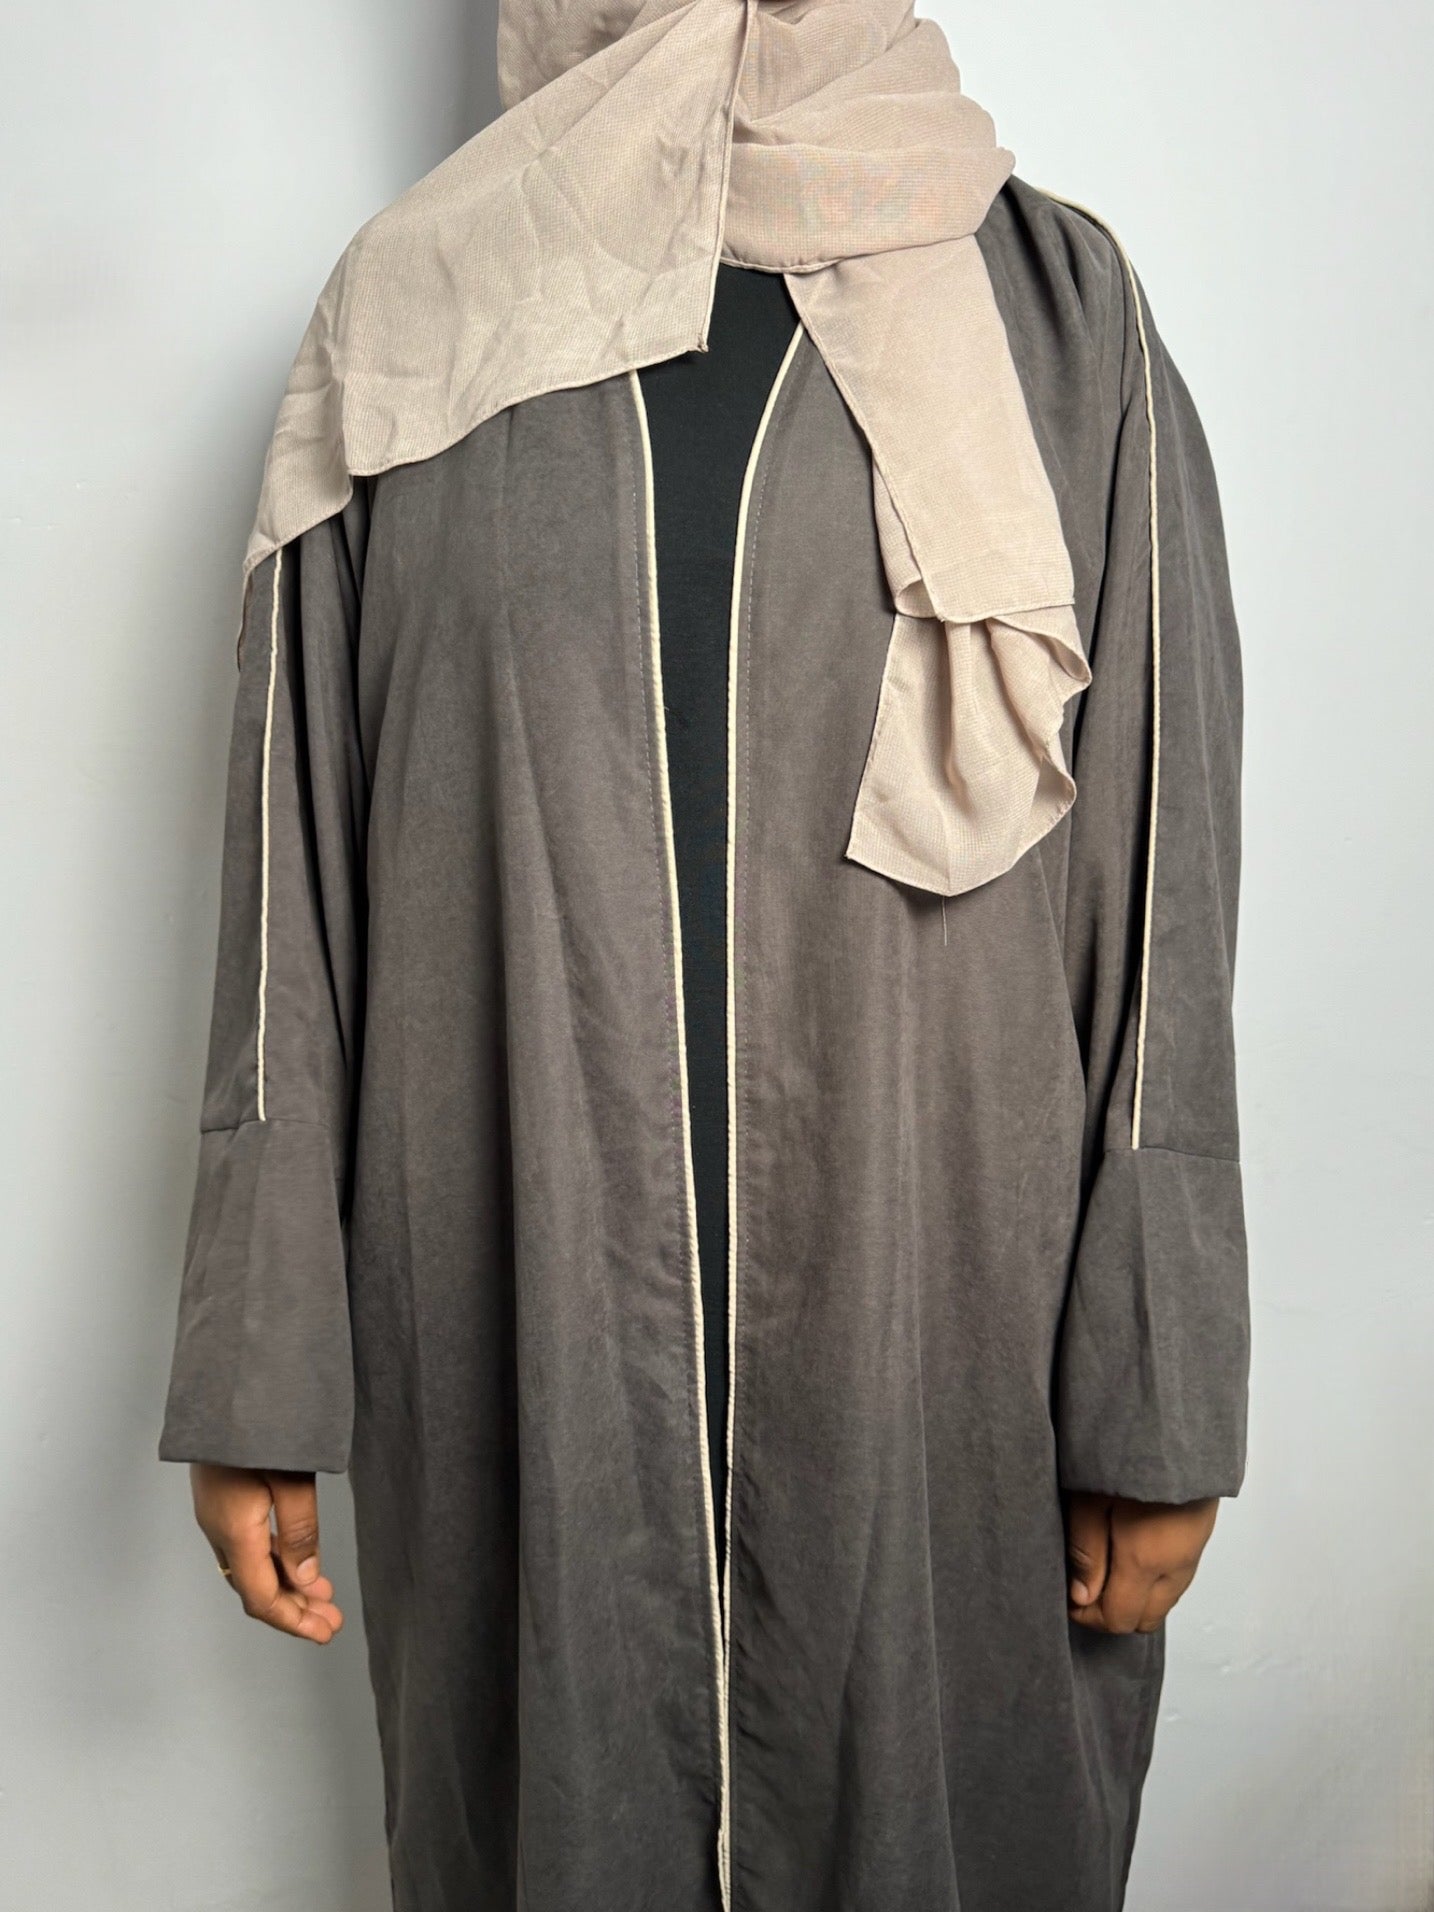 The Brown Suede Abaya